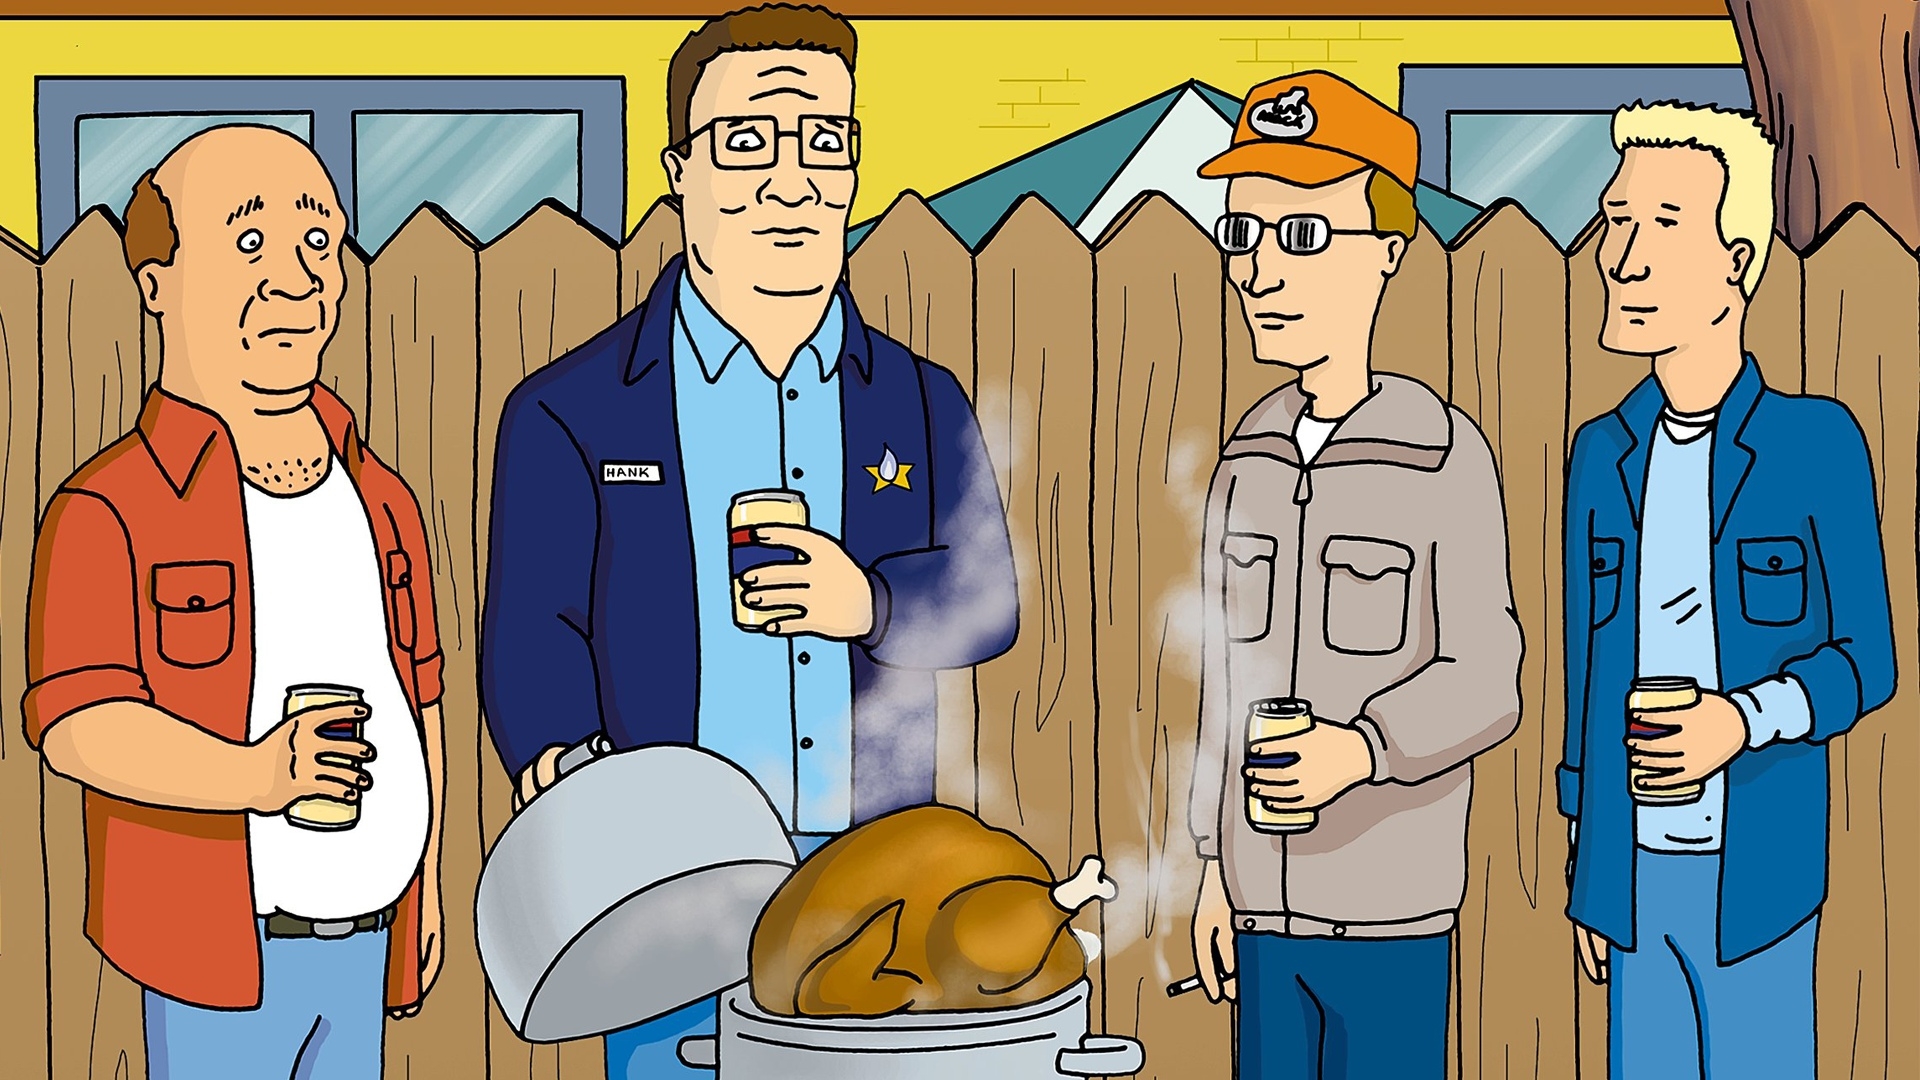 King of the Hill   King of the Hill Wallpaper 1920x1080 44787 1920x1080